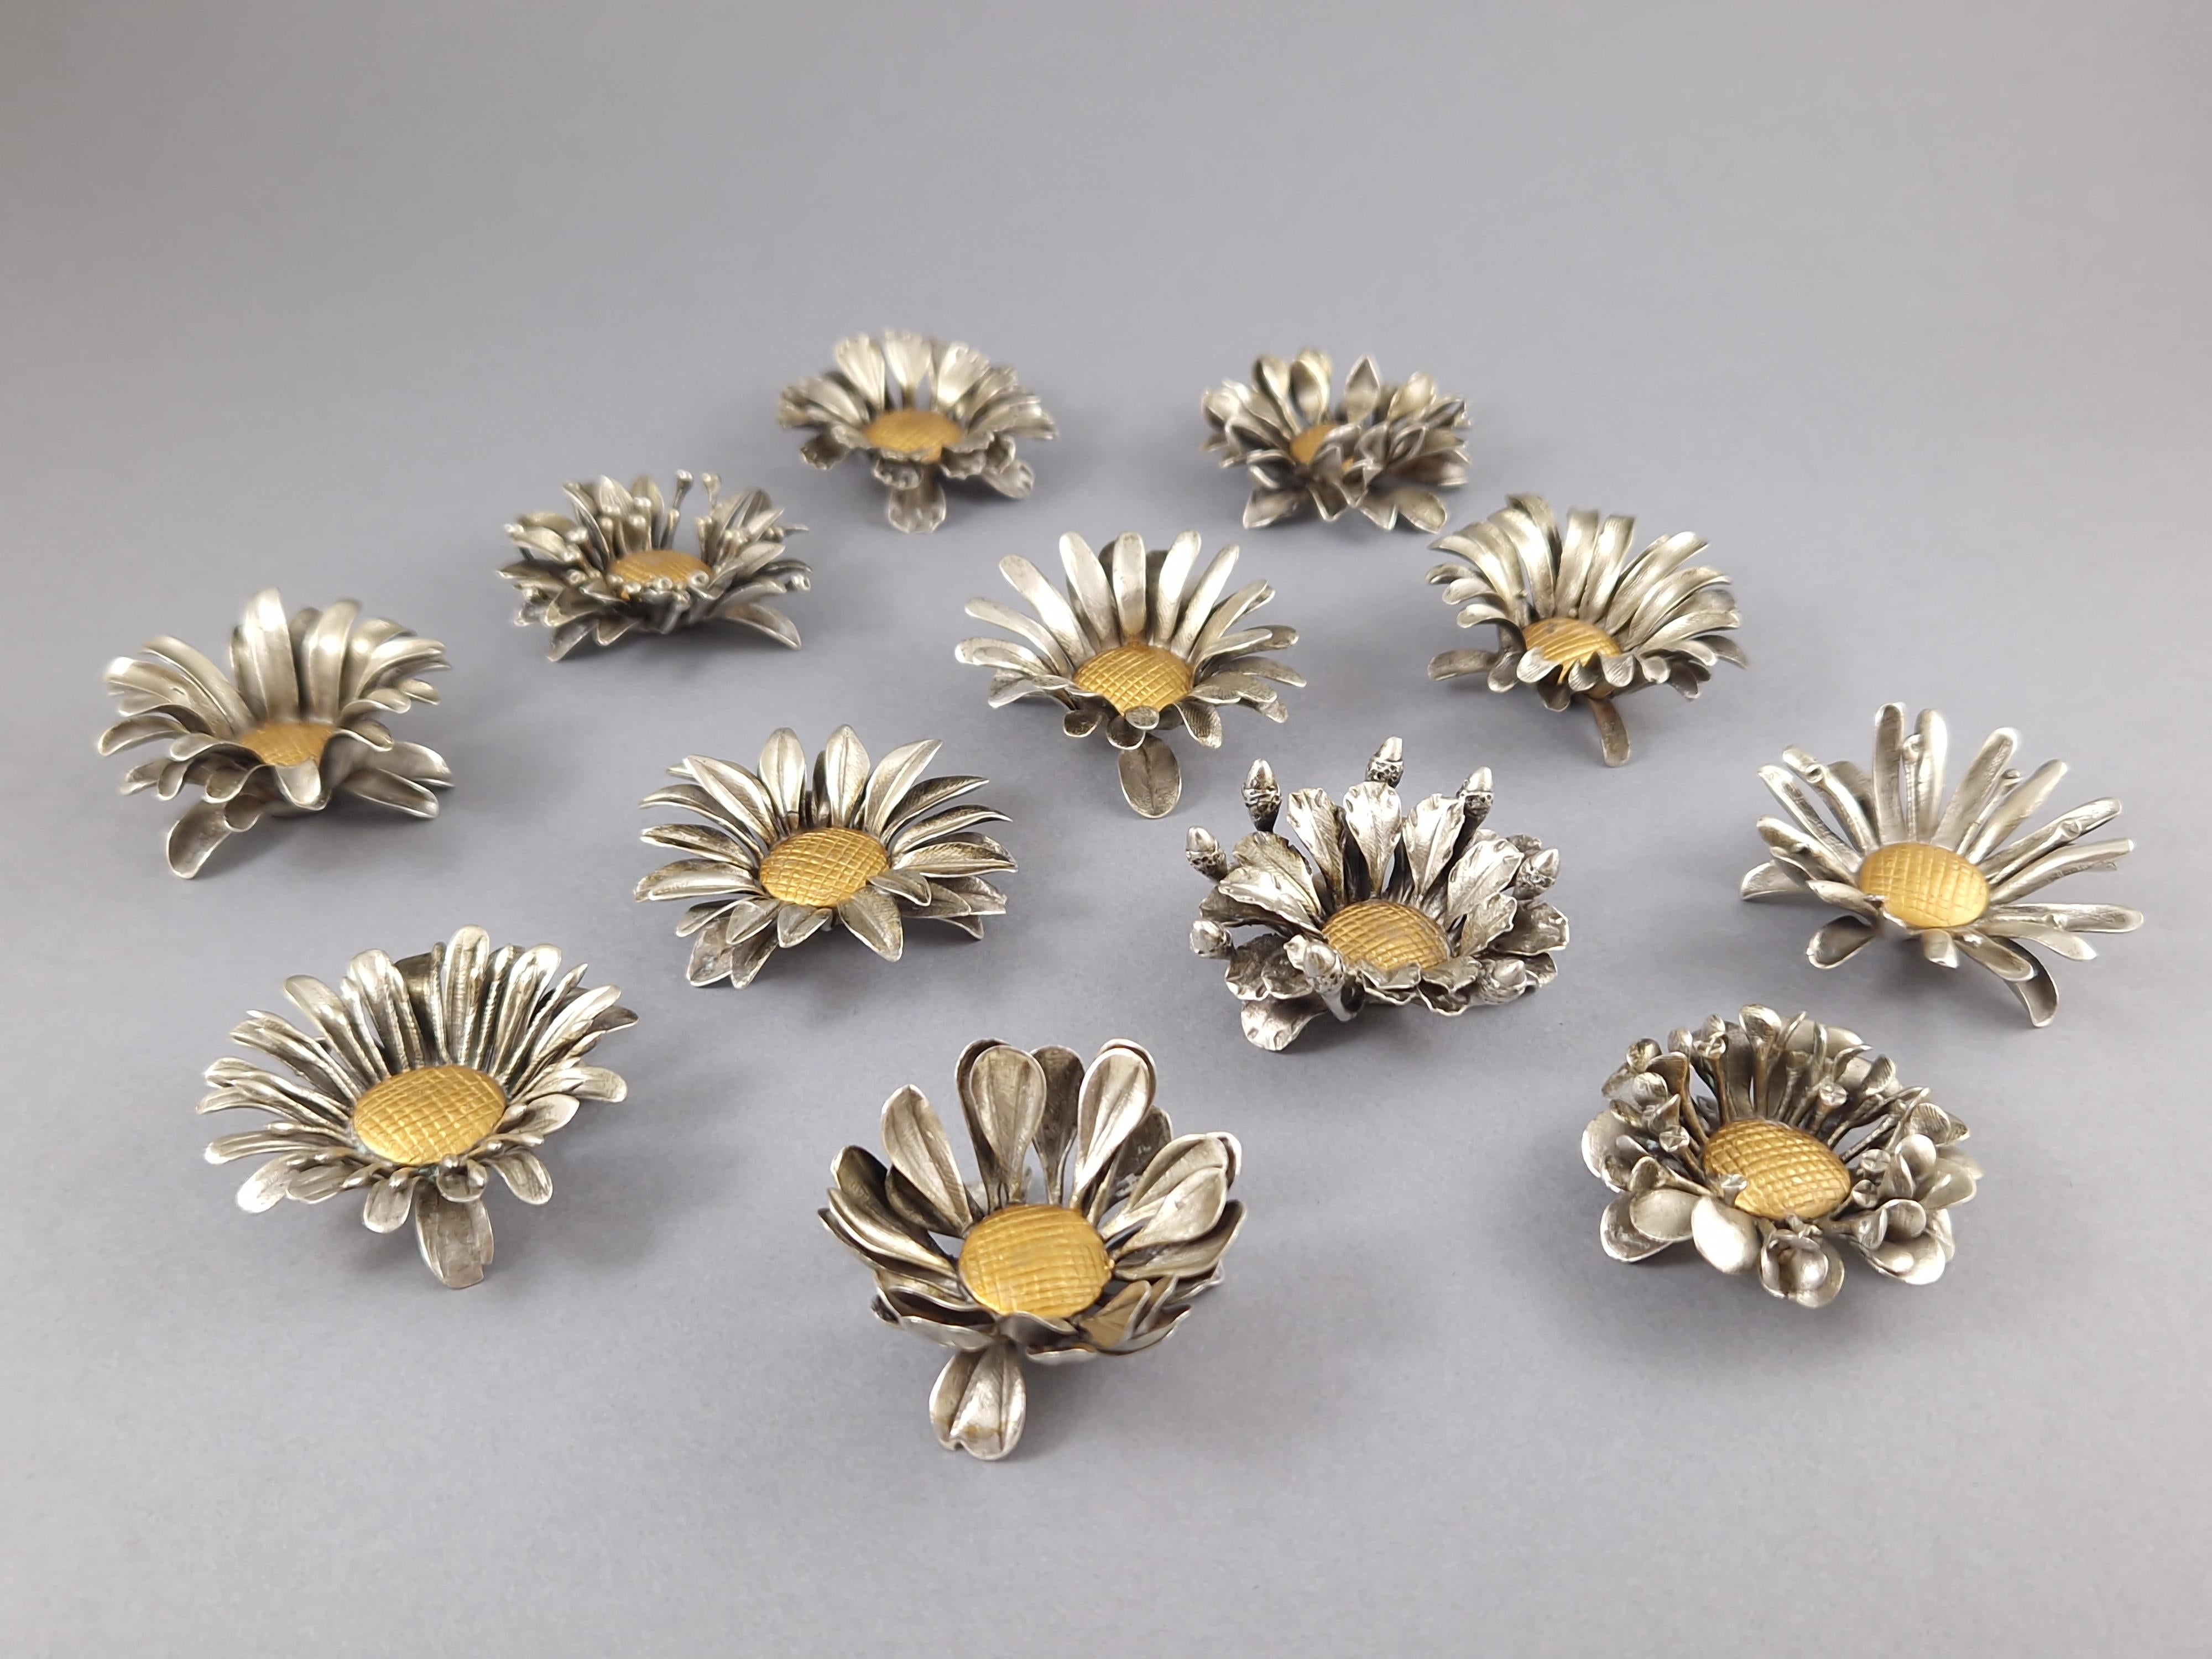 12 Place Card Holders / Table Decor in Solid Silver and Gilt 6